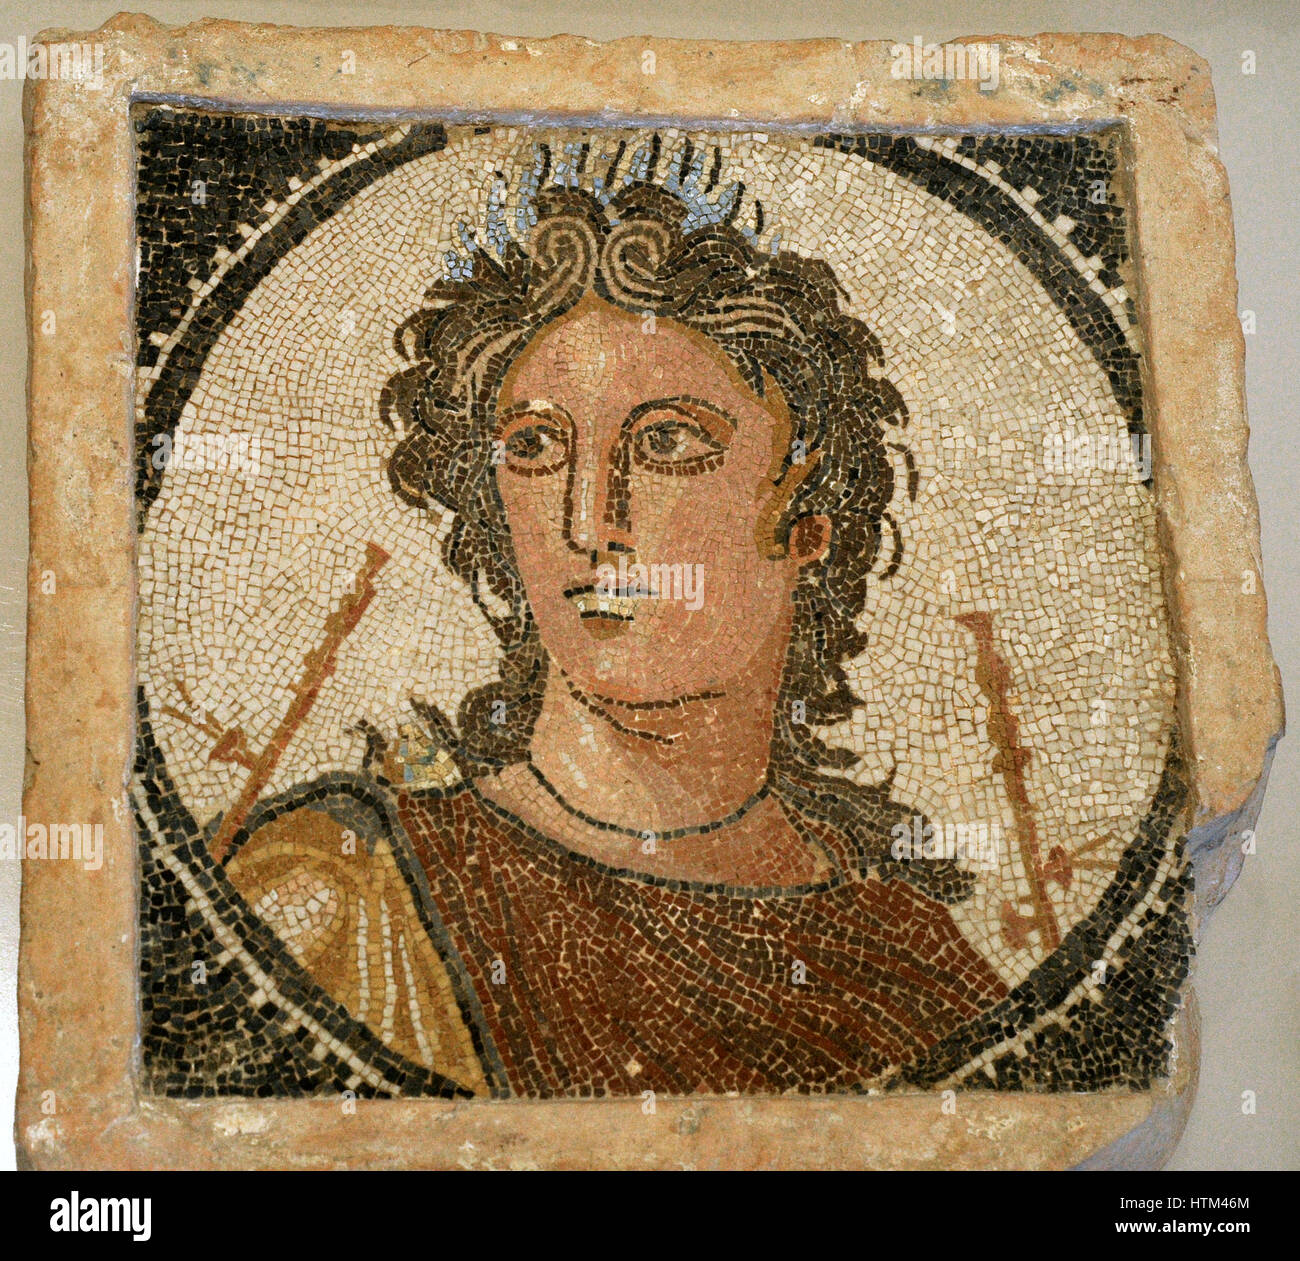 Mosaic of the wall depicting Euterpe, muse of the flute. 2nd century AD. National Archaeological Museum. Tarragona. Spain. Stock Photo